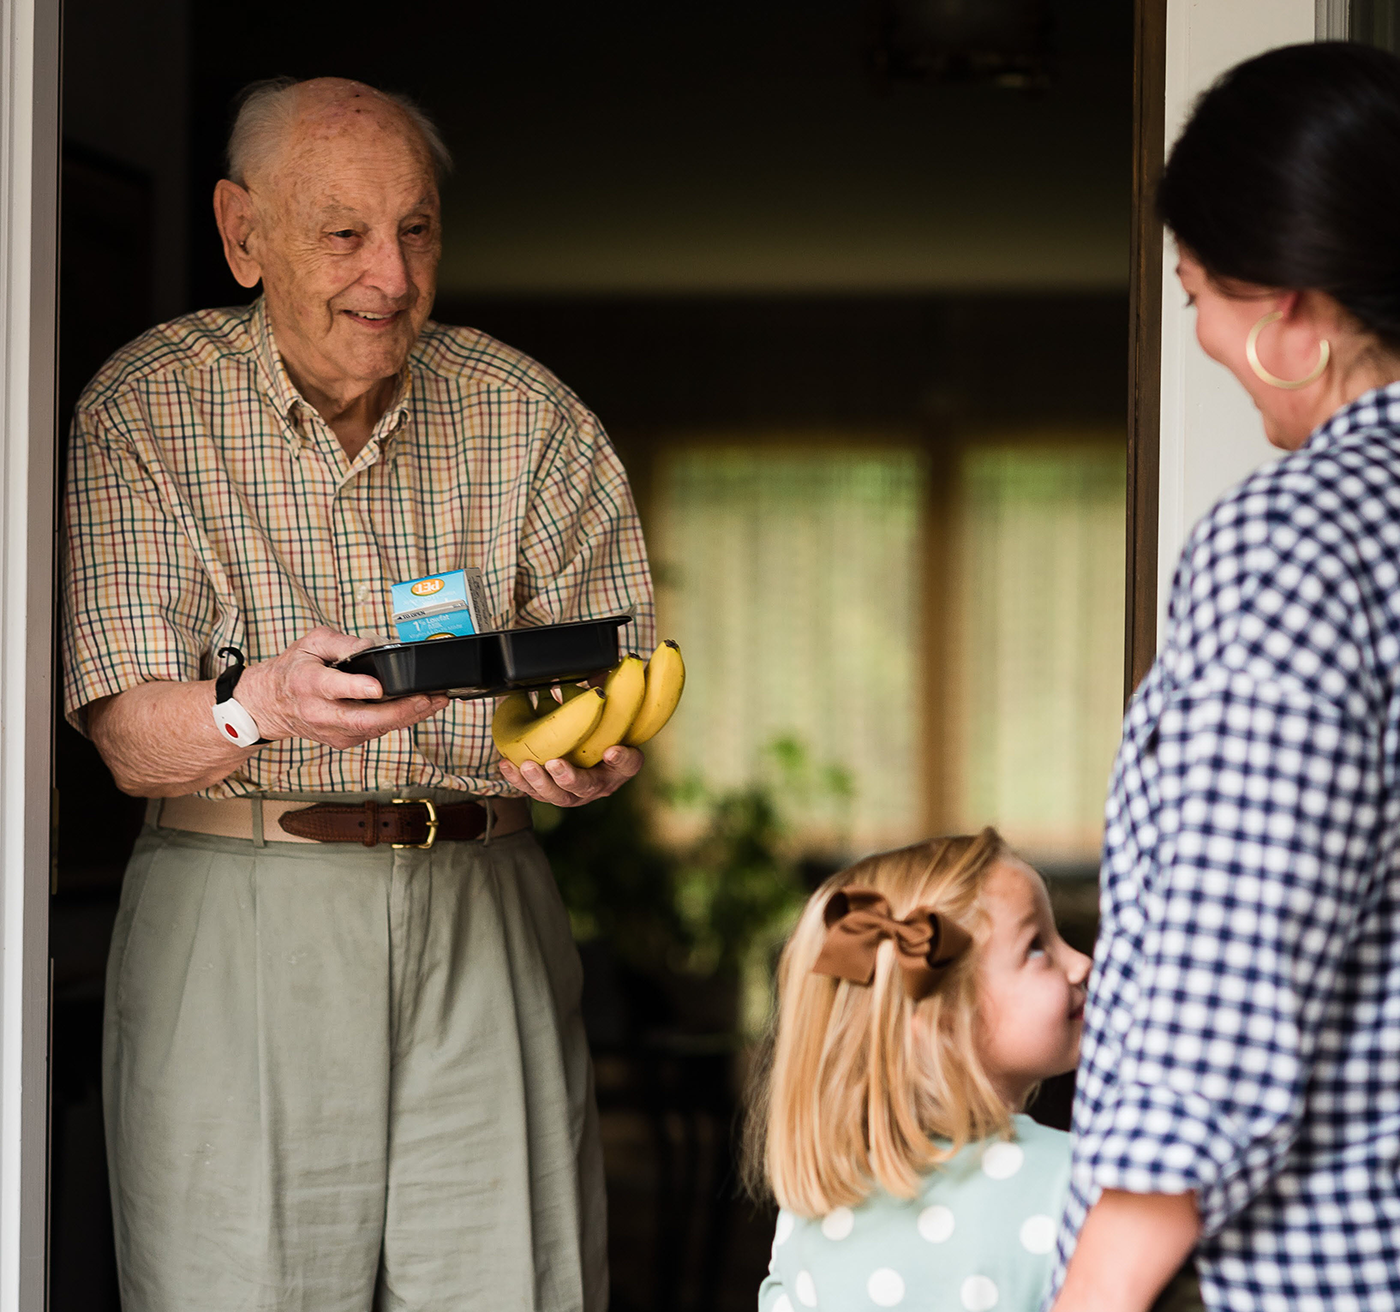 Image of a man receiving goods from Meals on Wheels.